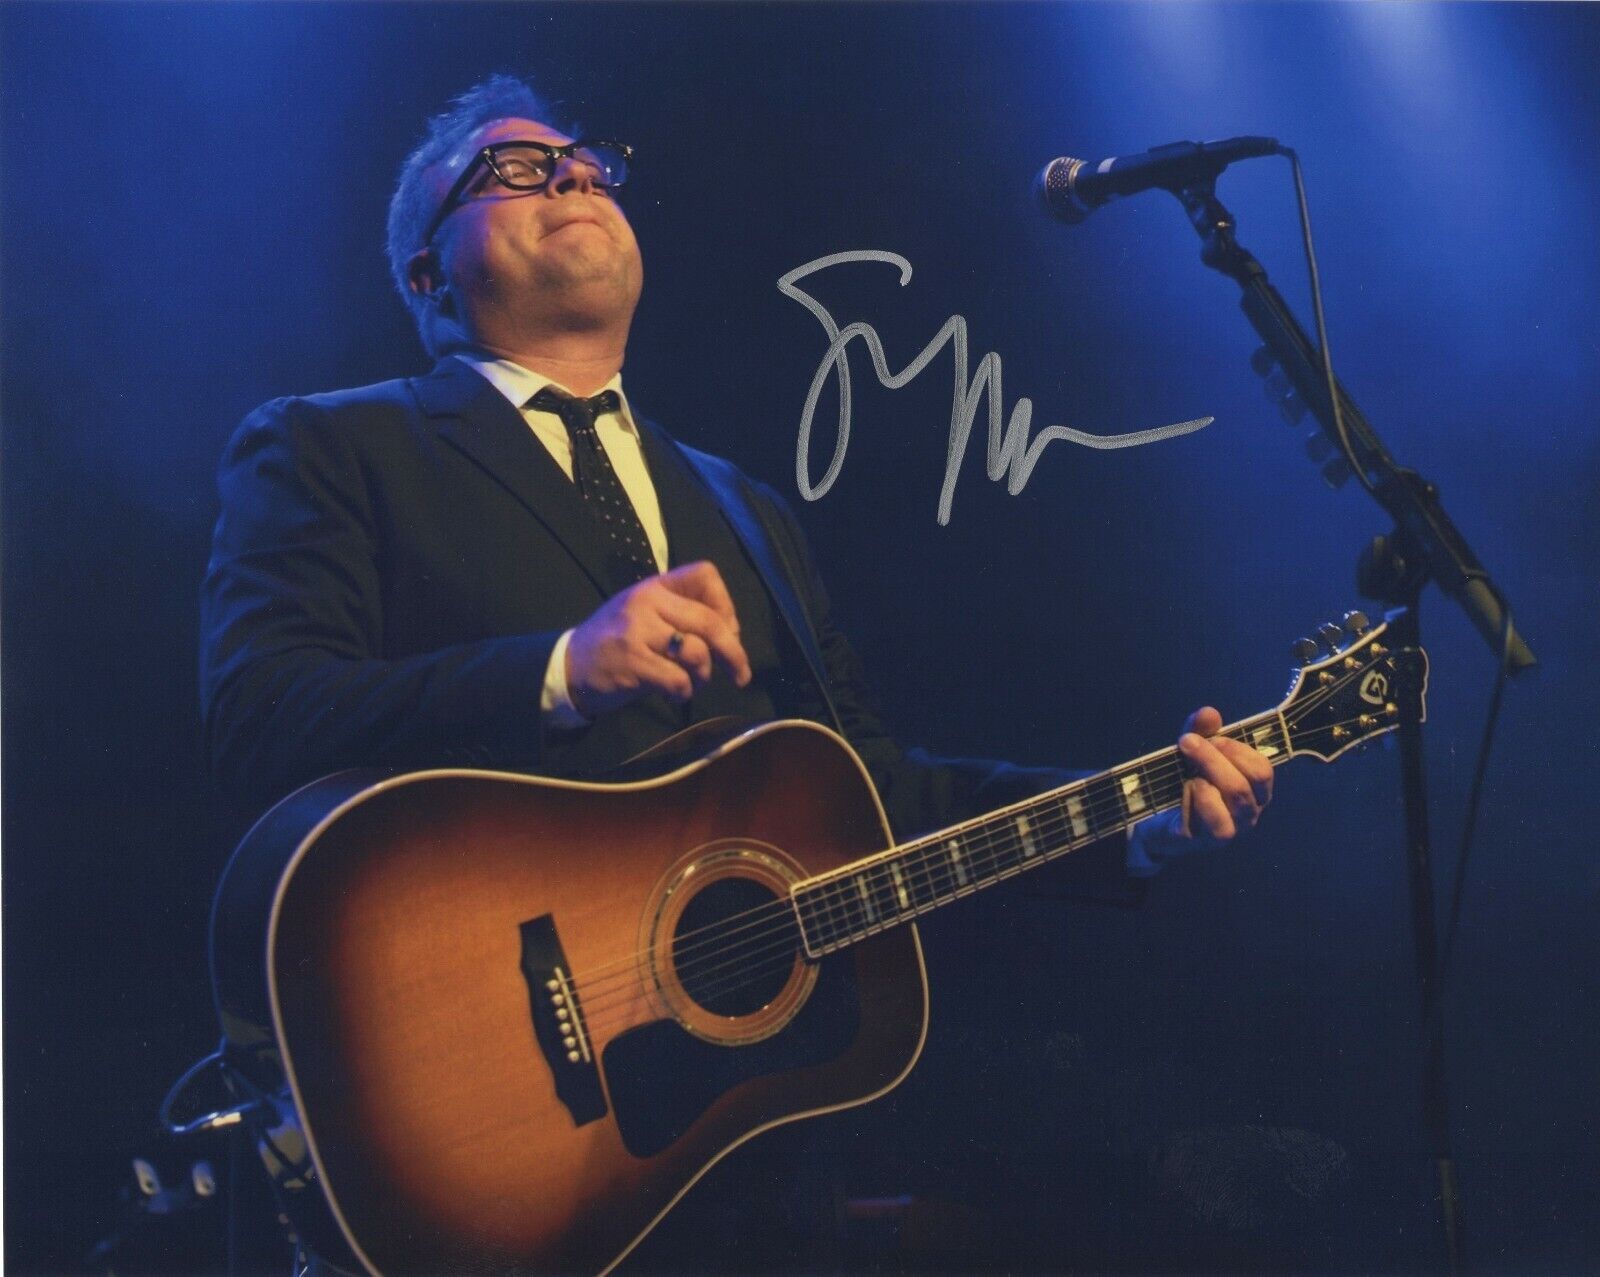 STEVEN PAGE SIGNED AUTOGRAPH 8X10 Photo Poster painting BARENAKED LADIES PROOF #5